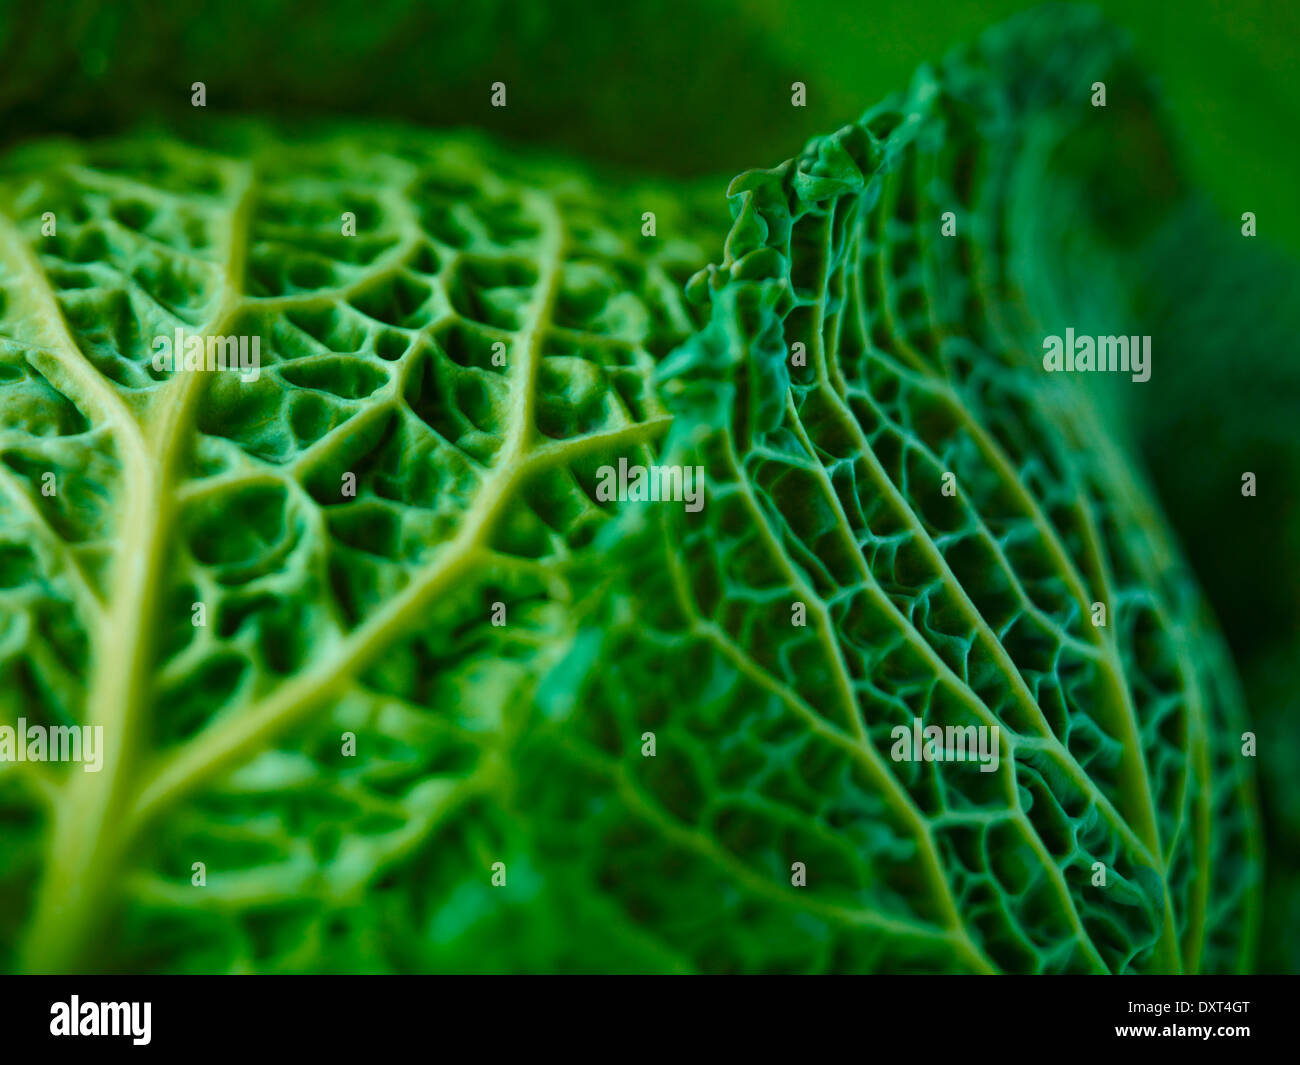 Extreme close up of Savoy cabbage Stock Photo